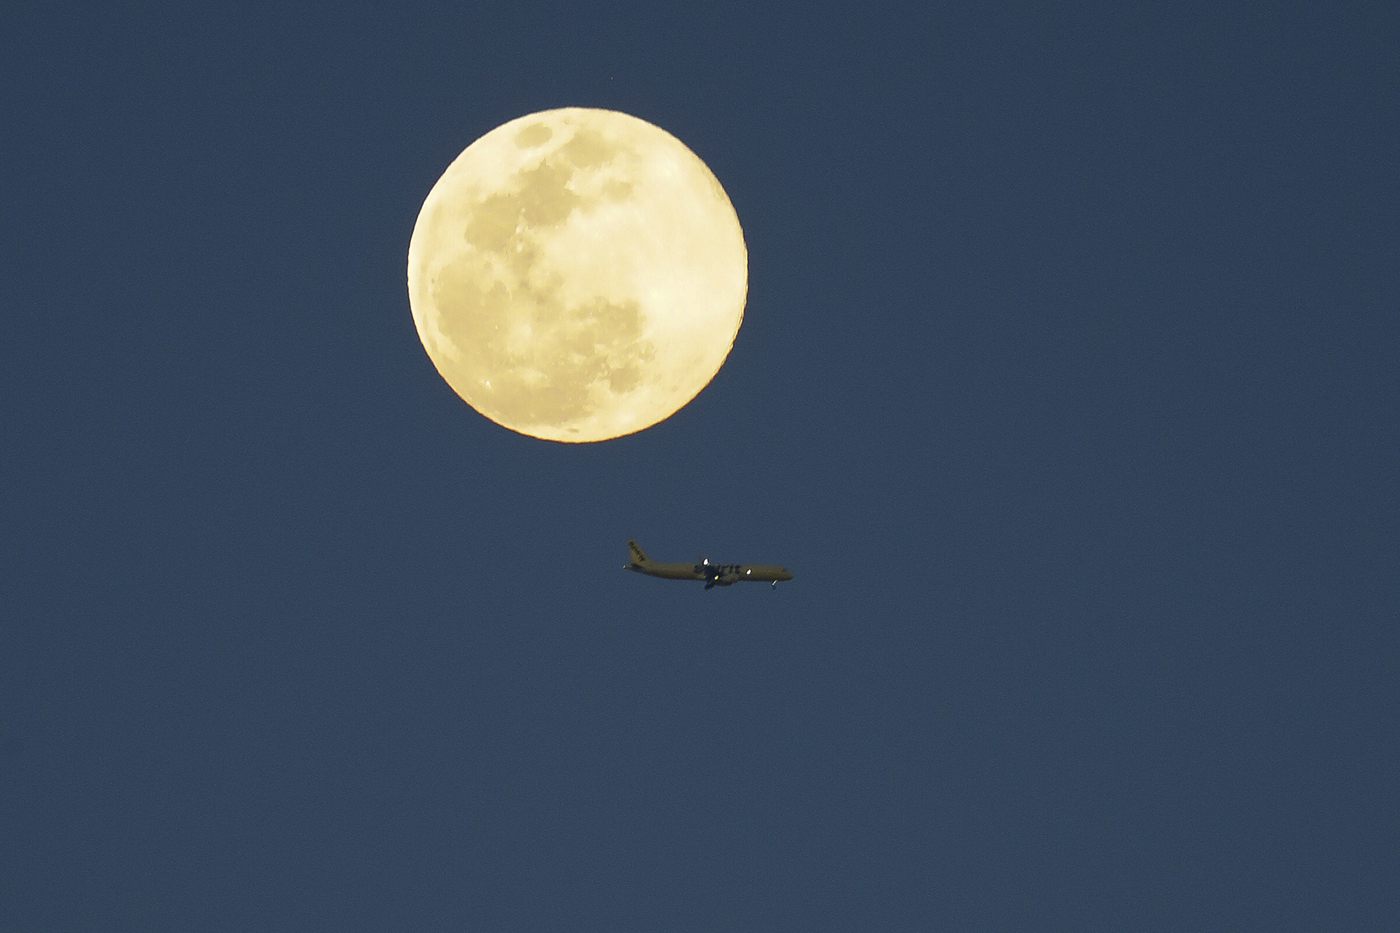 An airplane flys past a super moon as it rises in the sky Tuesday, April 7, 2020, in Orlando, Fla. (AP Photo/John Raoux)